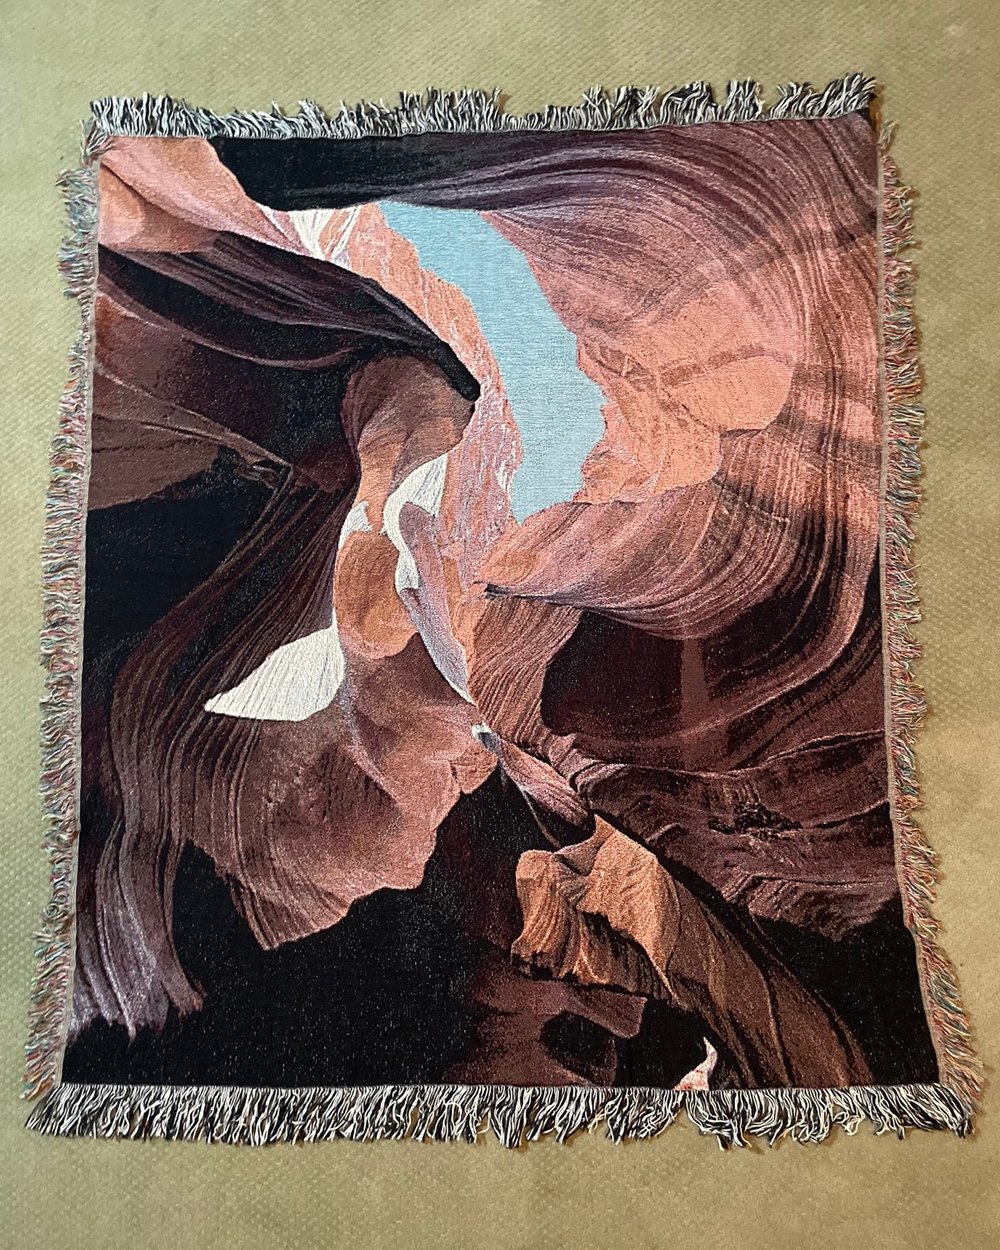 Archive Blanket #10 - Antelope Canyon